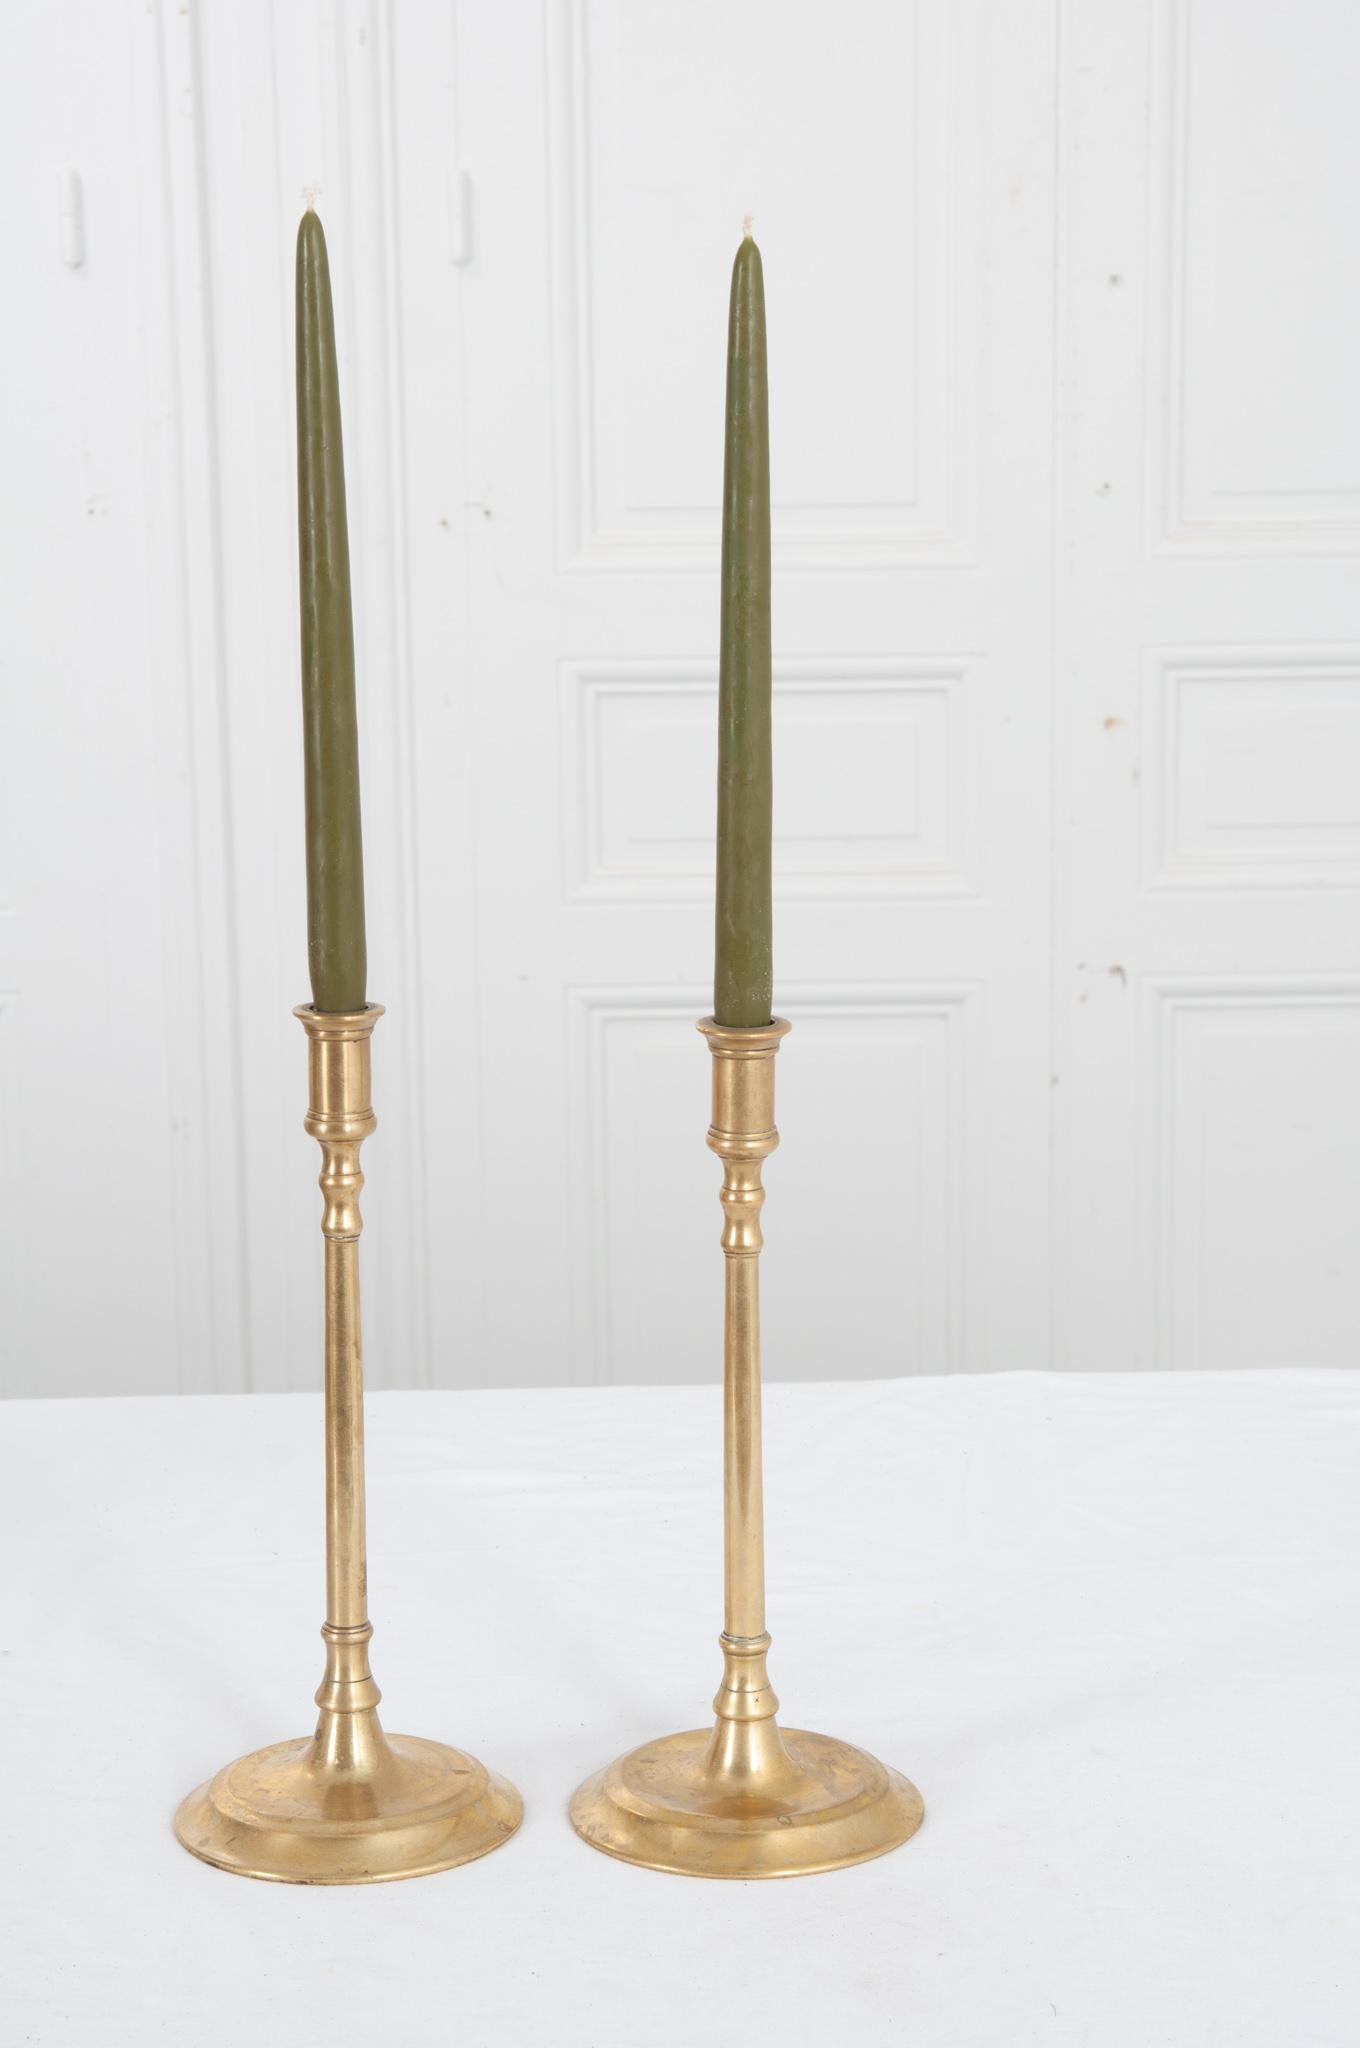 A sophisticated pair of 19th century brass candlestick holders from France. What they lack in detail they makeup for in antique elegance. Recently cleaned and polished they are in great condition with few signs of wear. Make sure to view the